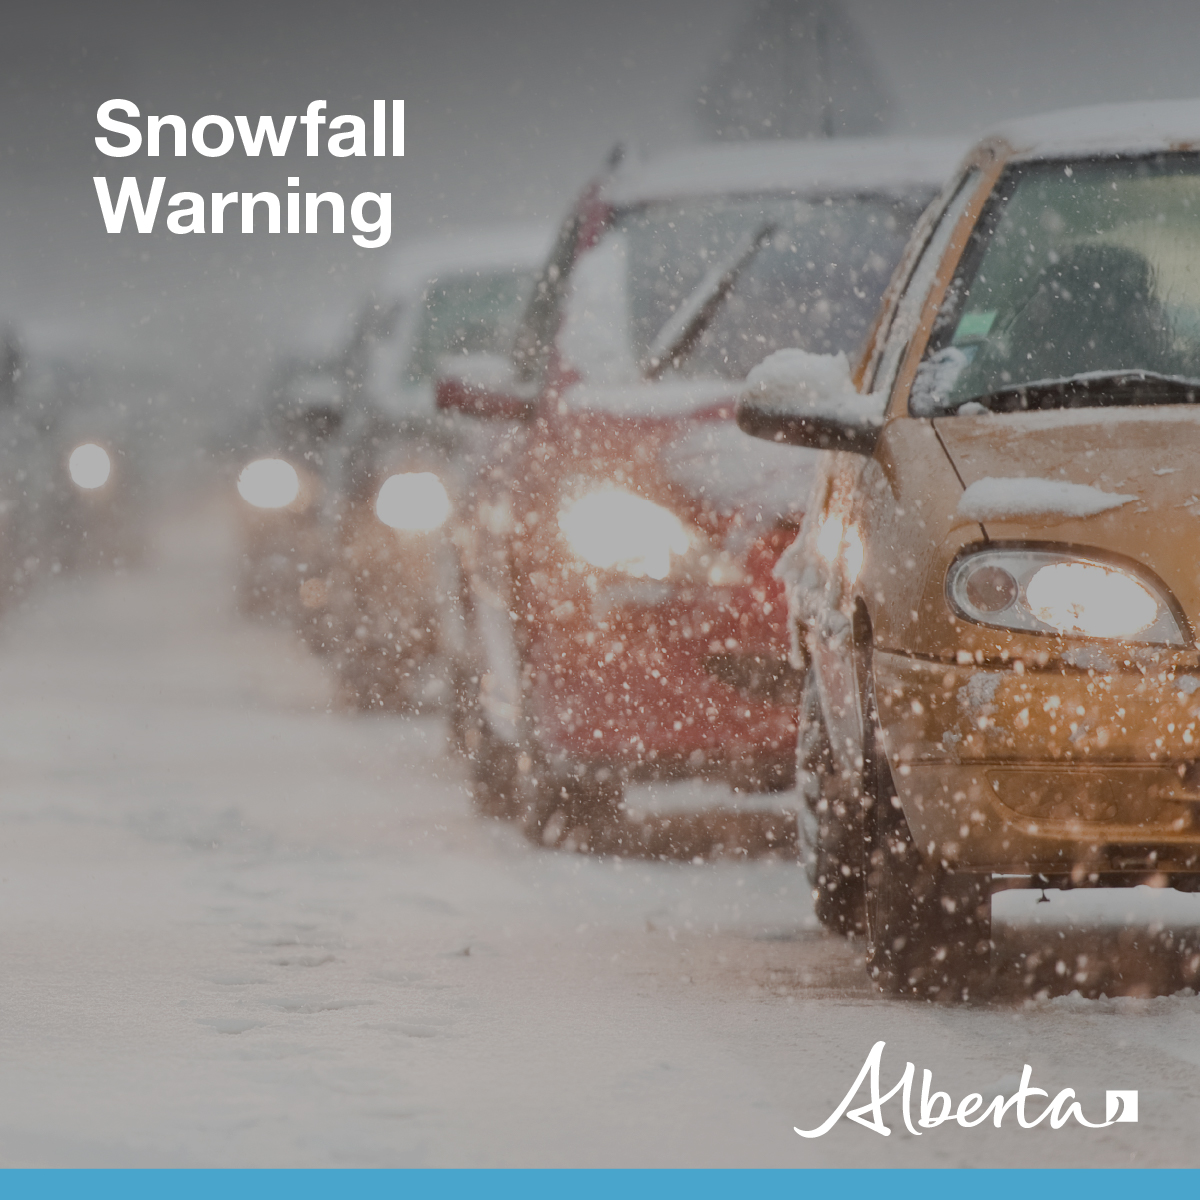 The first significant snowfall of the season is expected in central and southern Alberta tomorrow morning. Be prepared for heavy, wet snow and reduced visibility. If you’re traveling, check road conditions before heading out: 511.alberta.ca/about/mobileapp #abroads